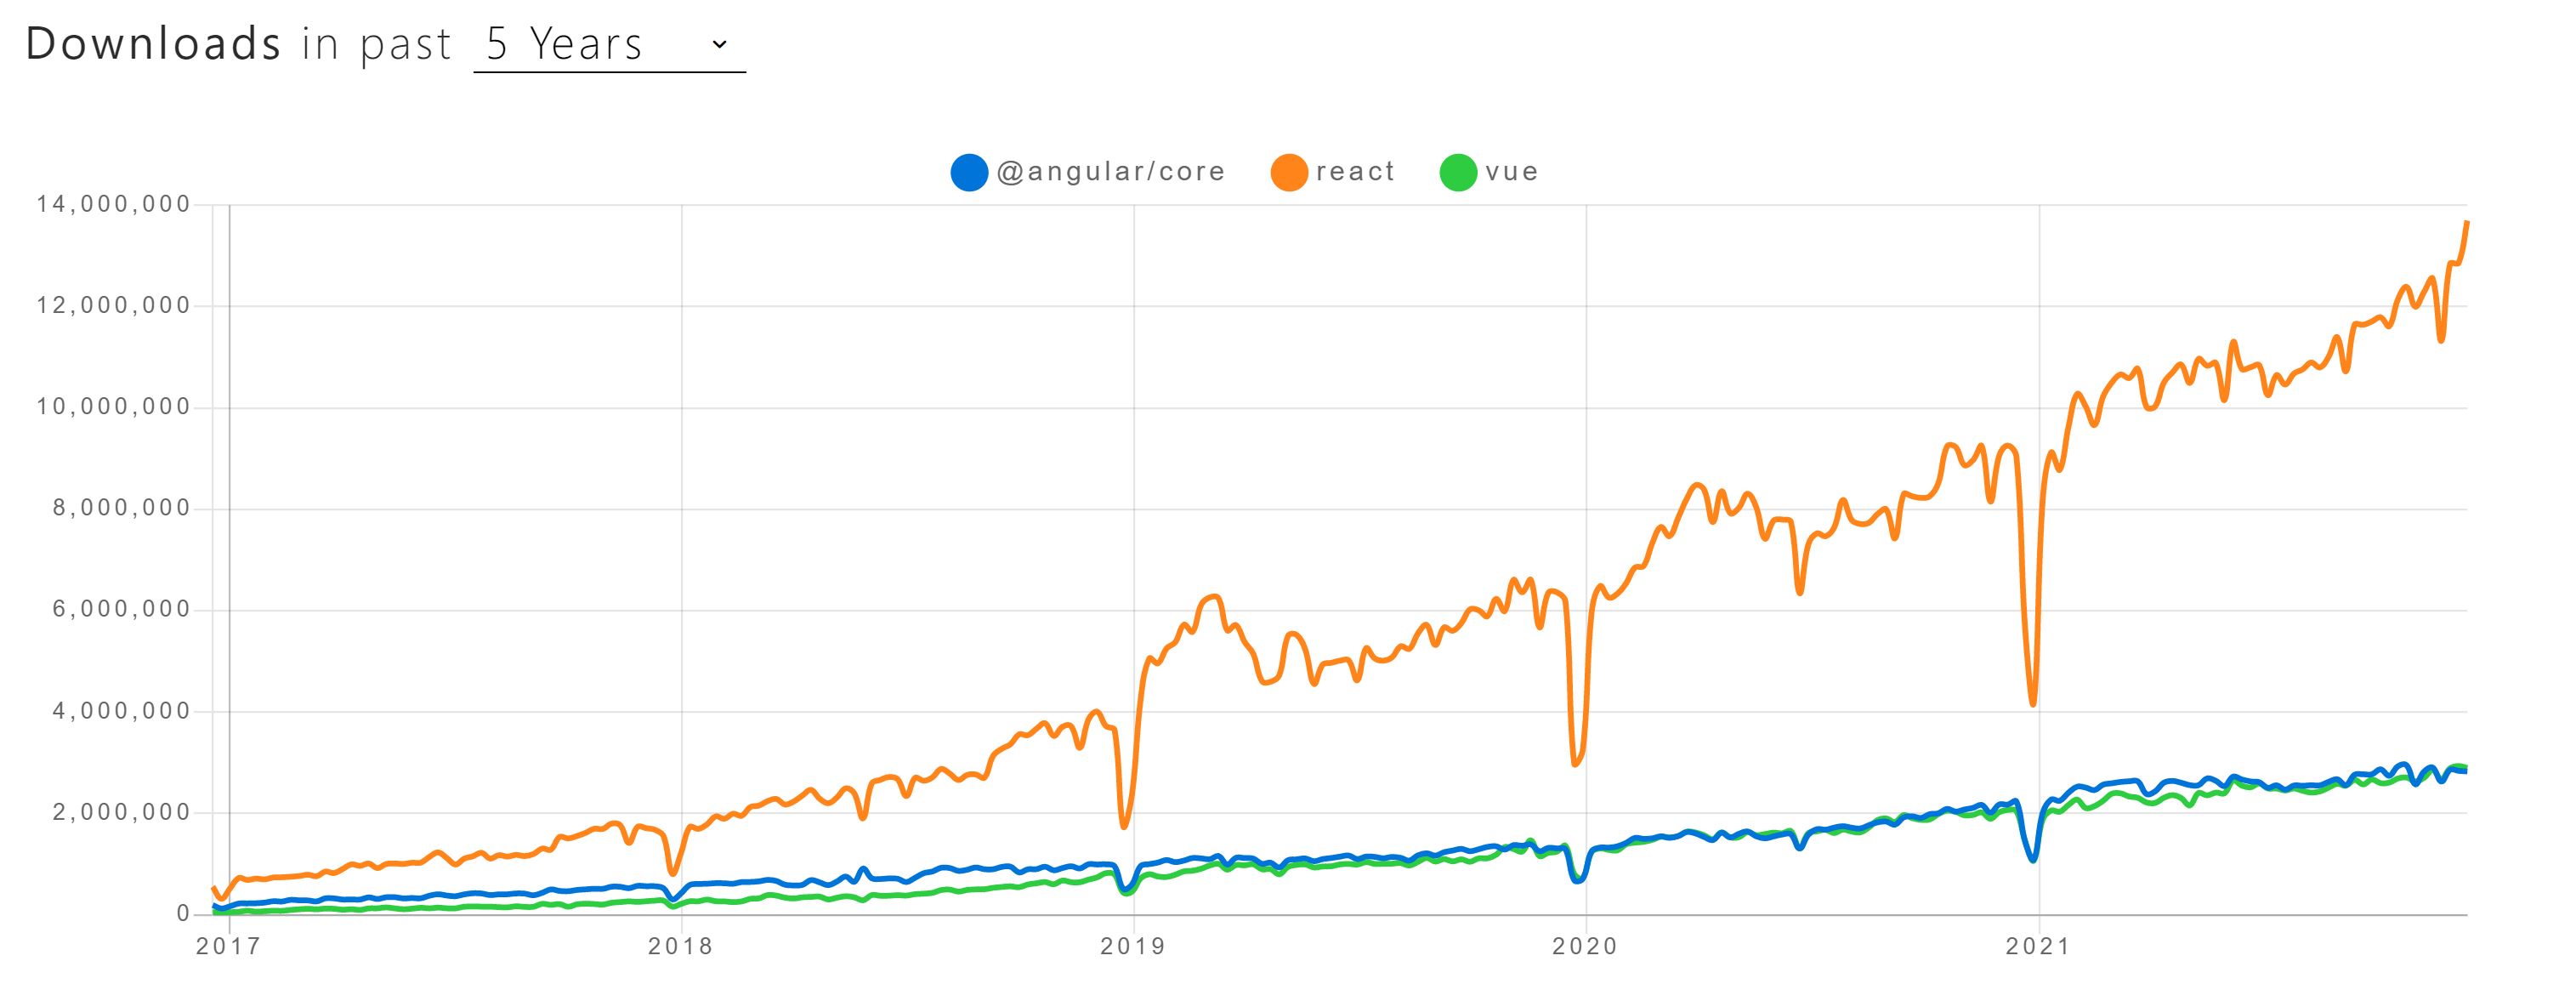 React vs. Angular vs. Vue - Downloads by developers from NPM